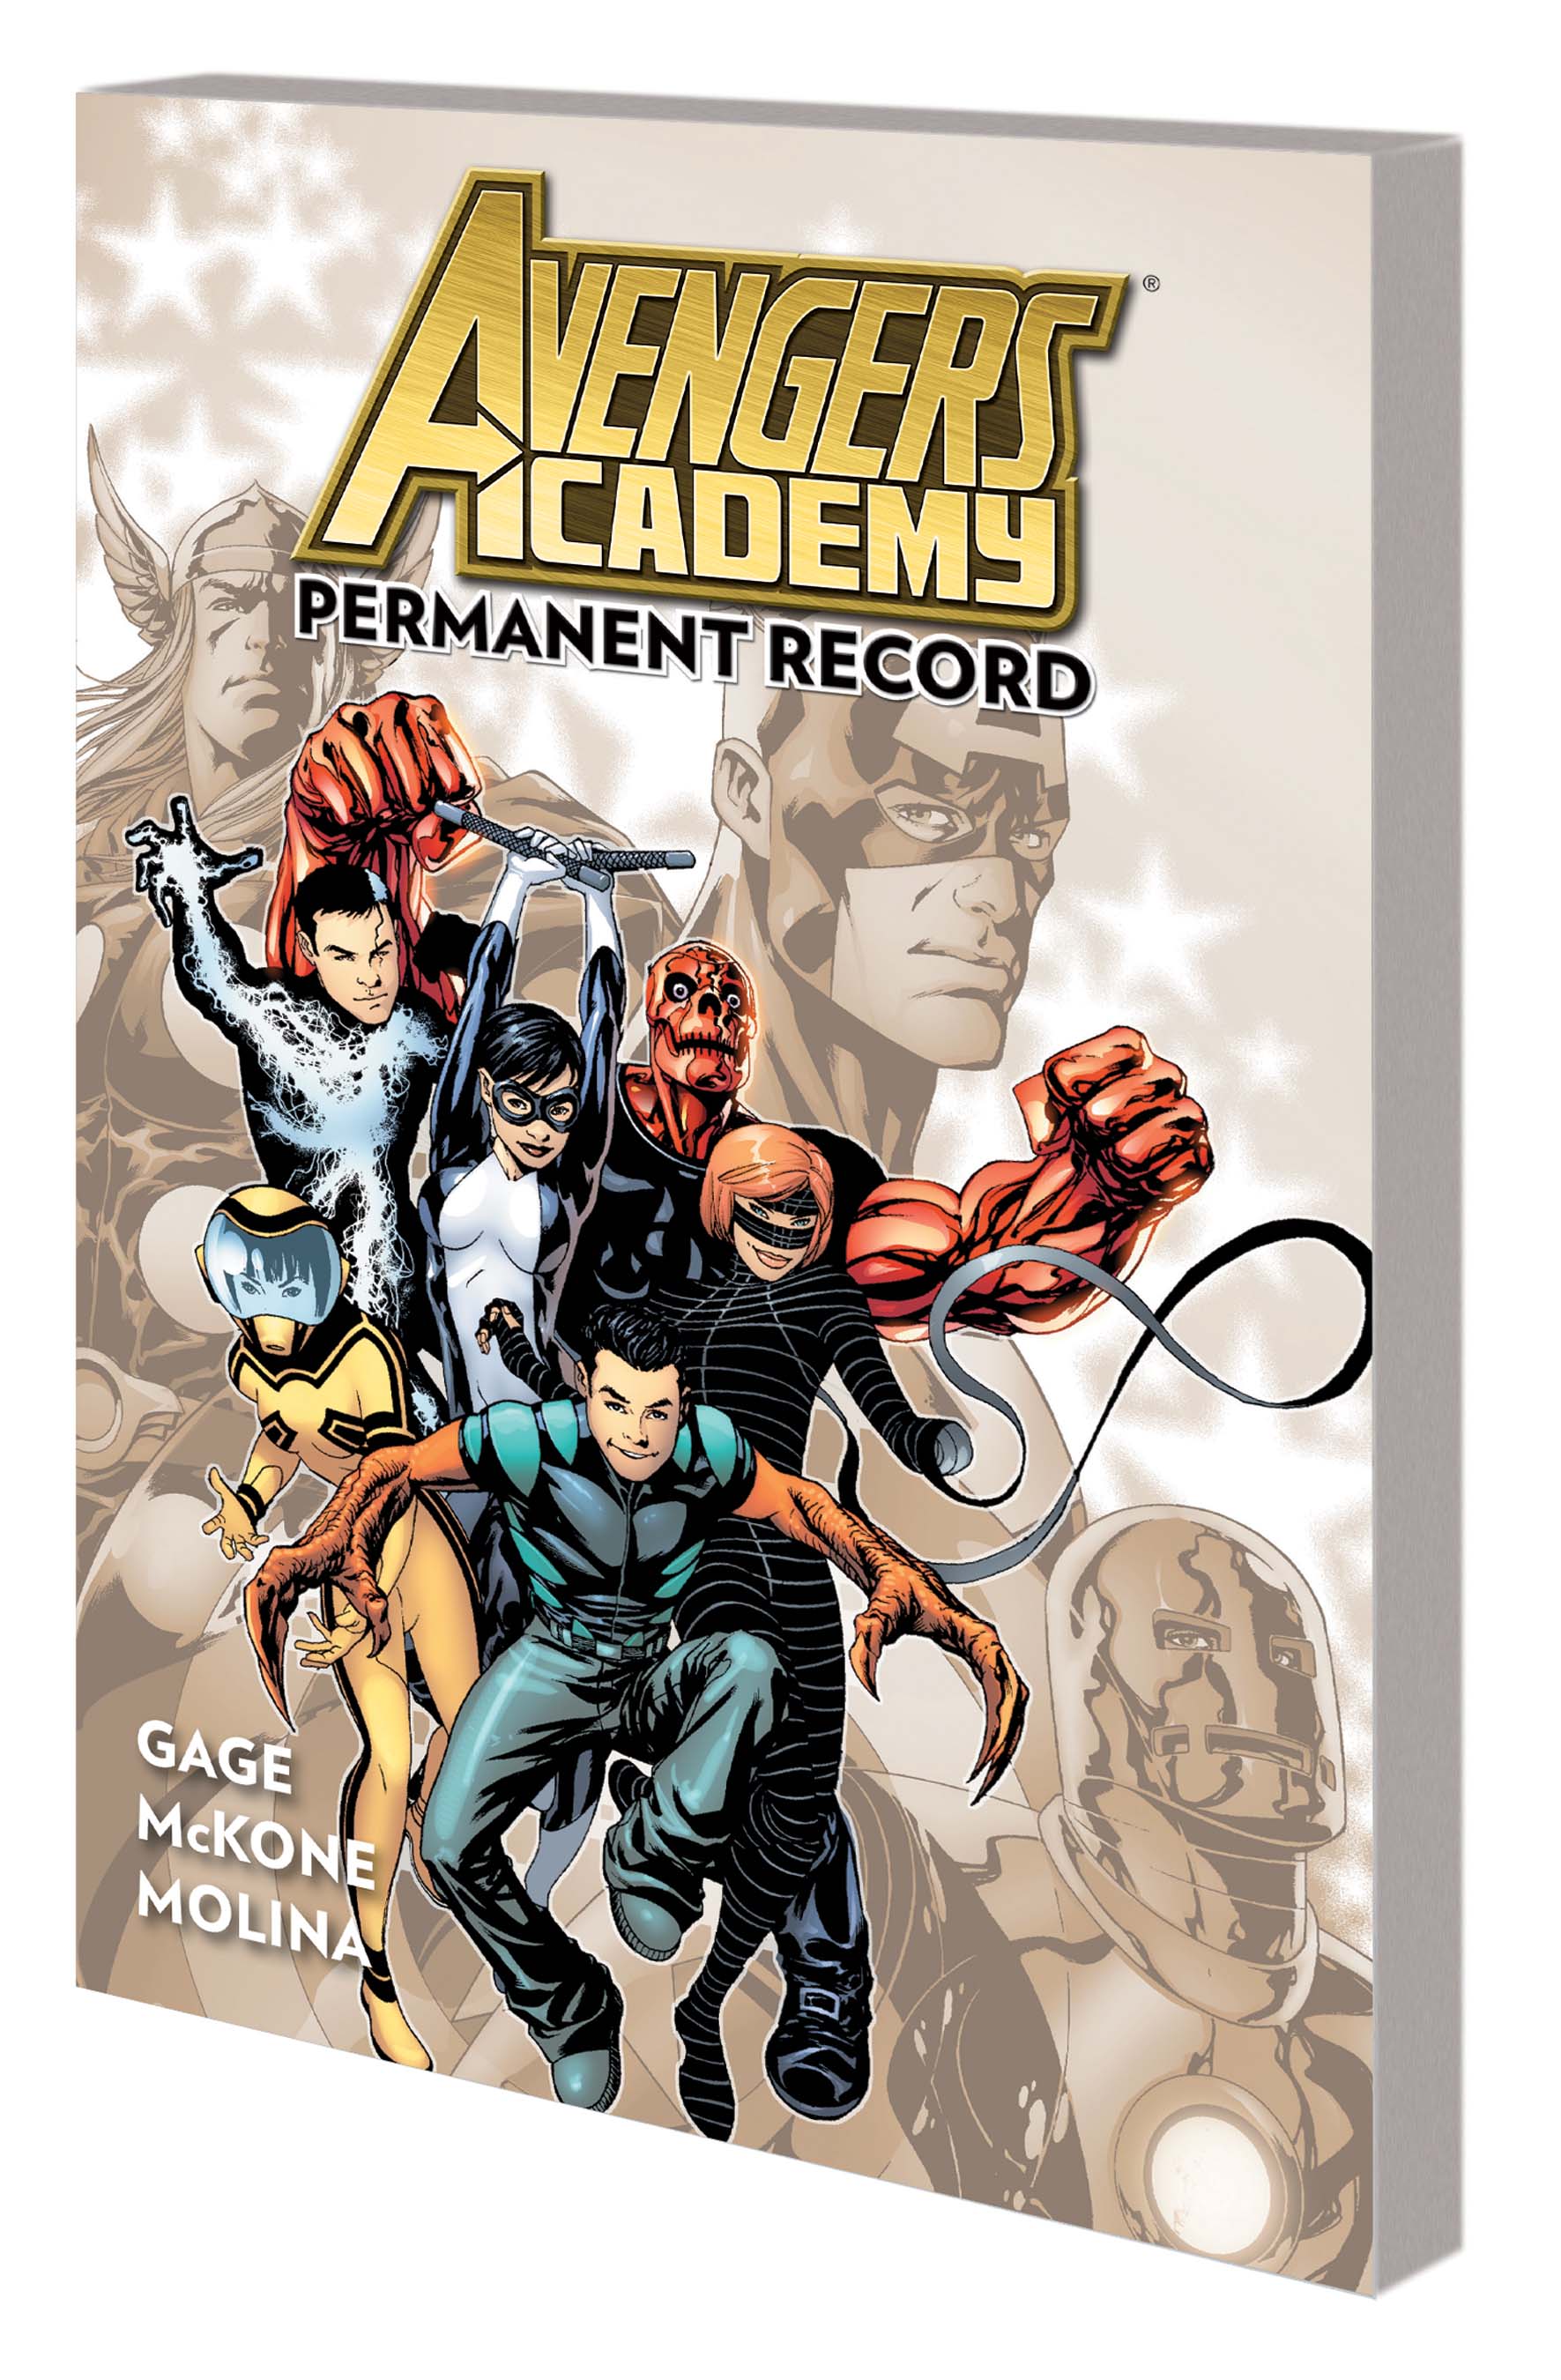 Avengers Academy Vol 1 : Permanent Record TPB (Trade Paperback)